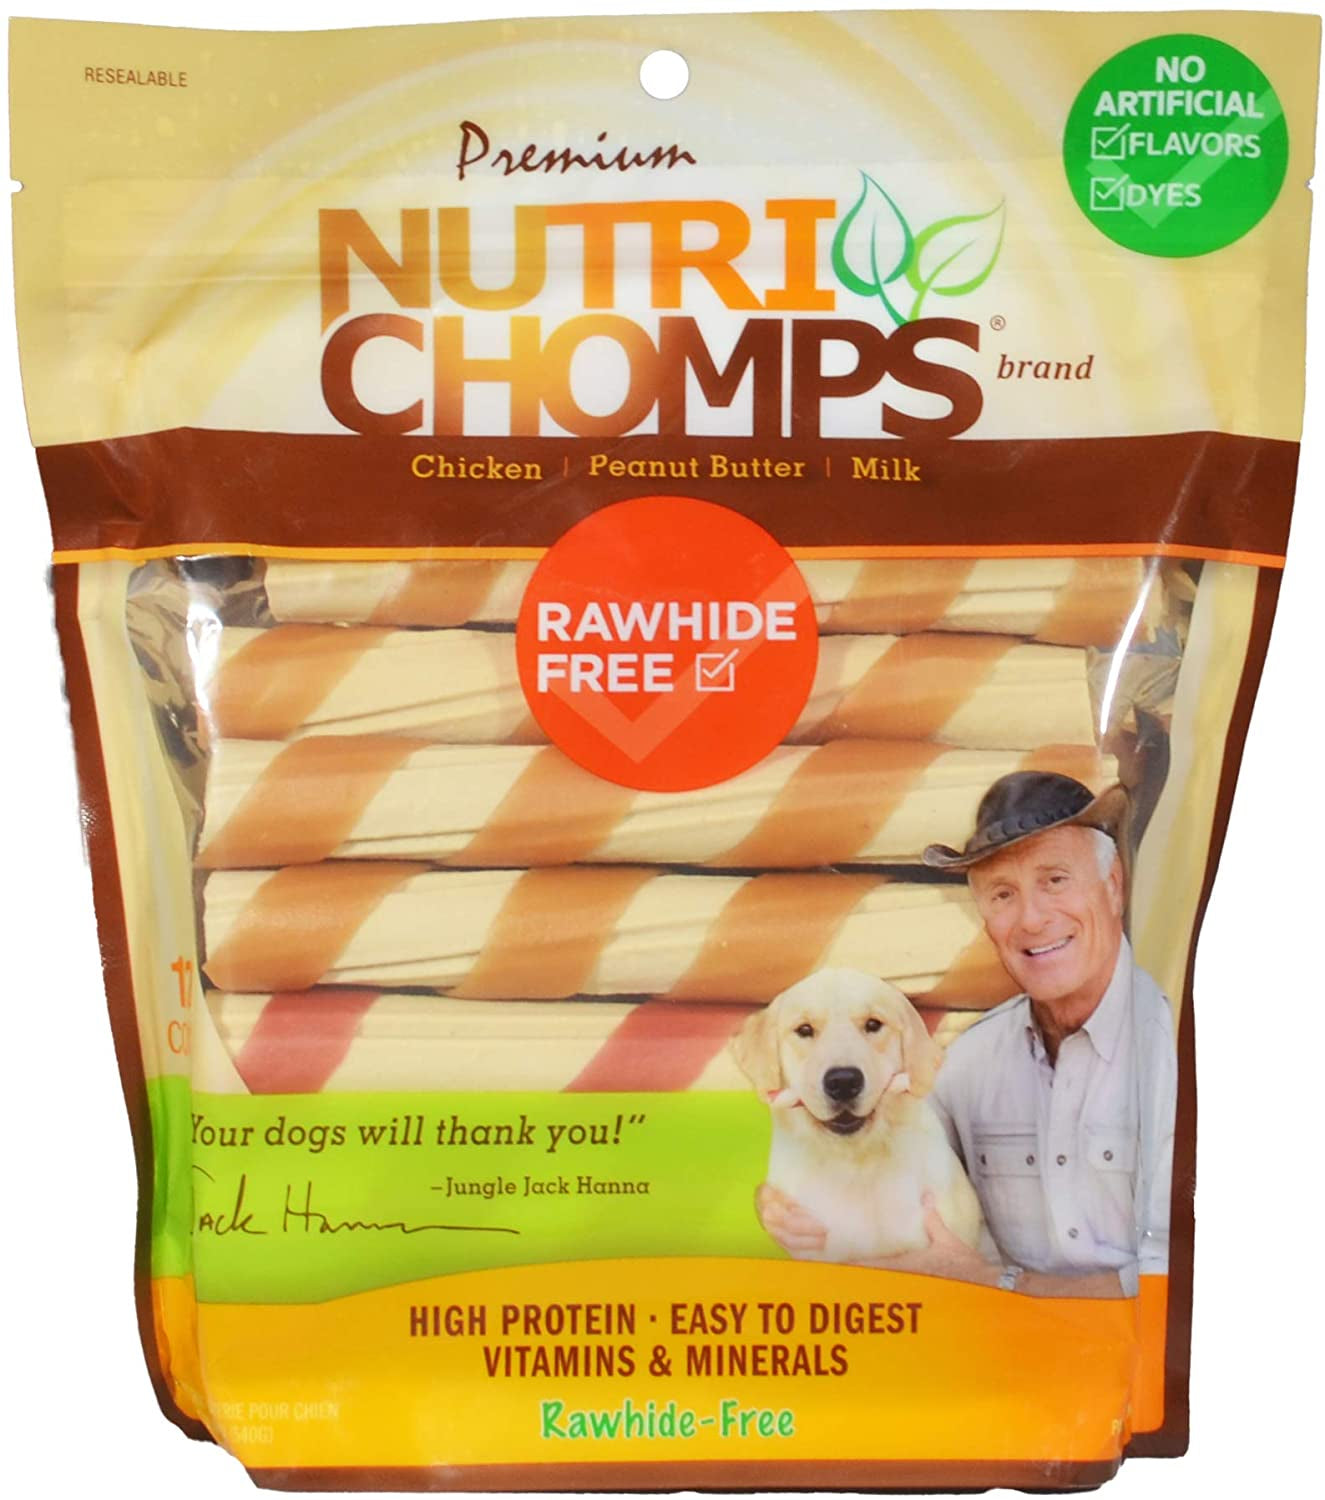 Nutri Chomps Wrapped Twist Dog Treat Assorted Flavors